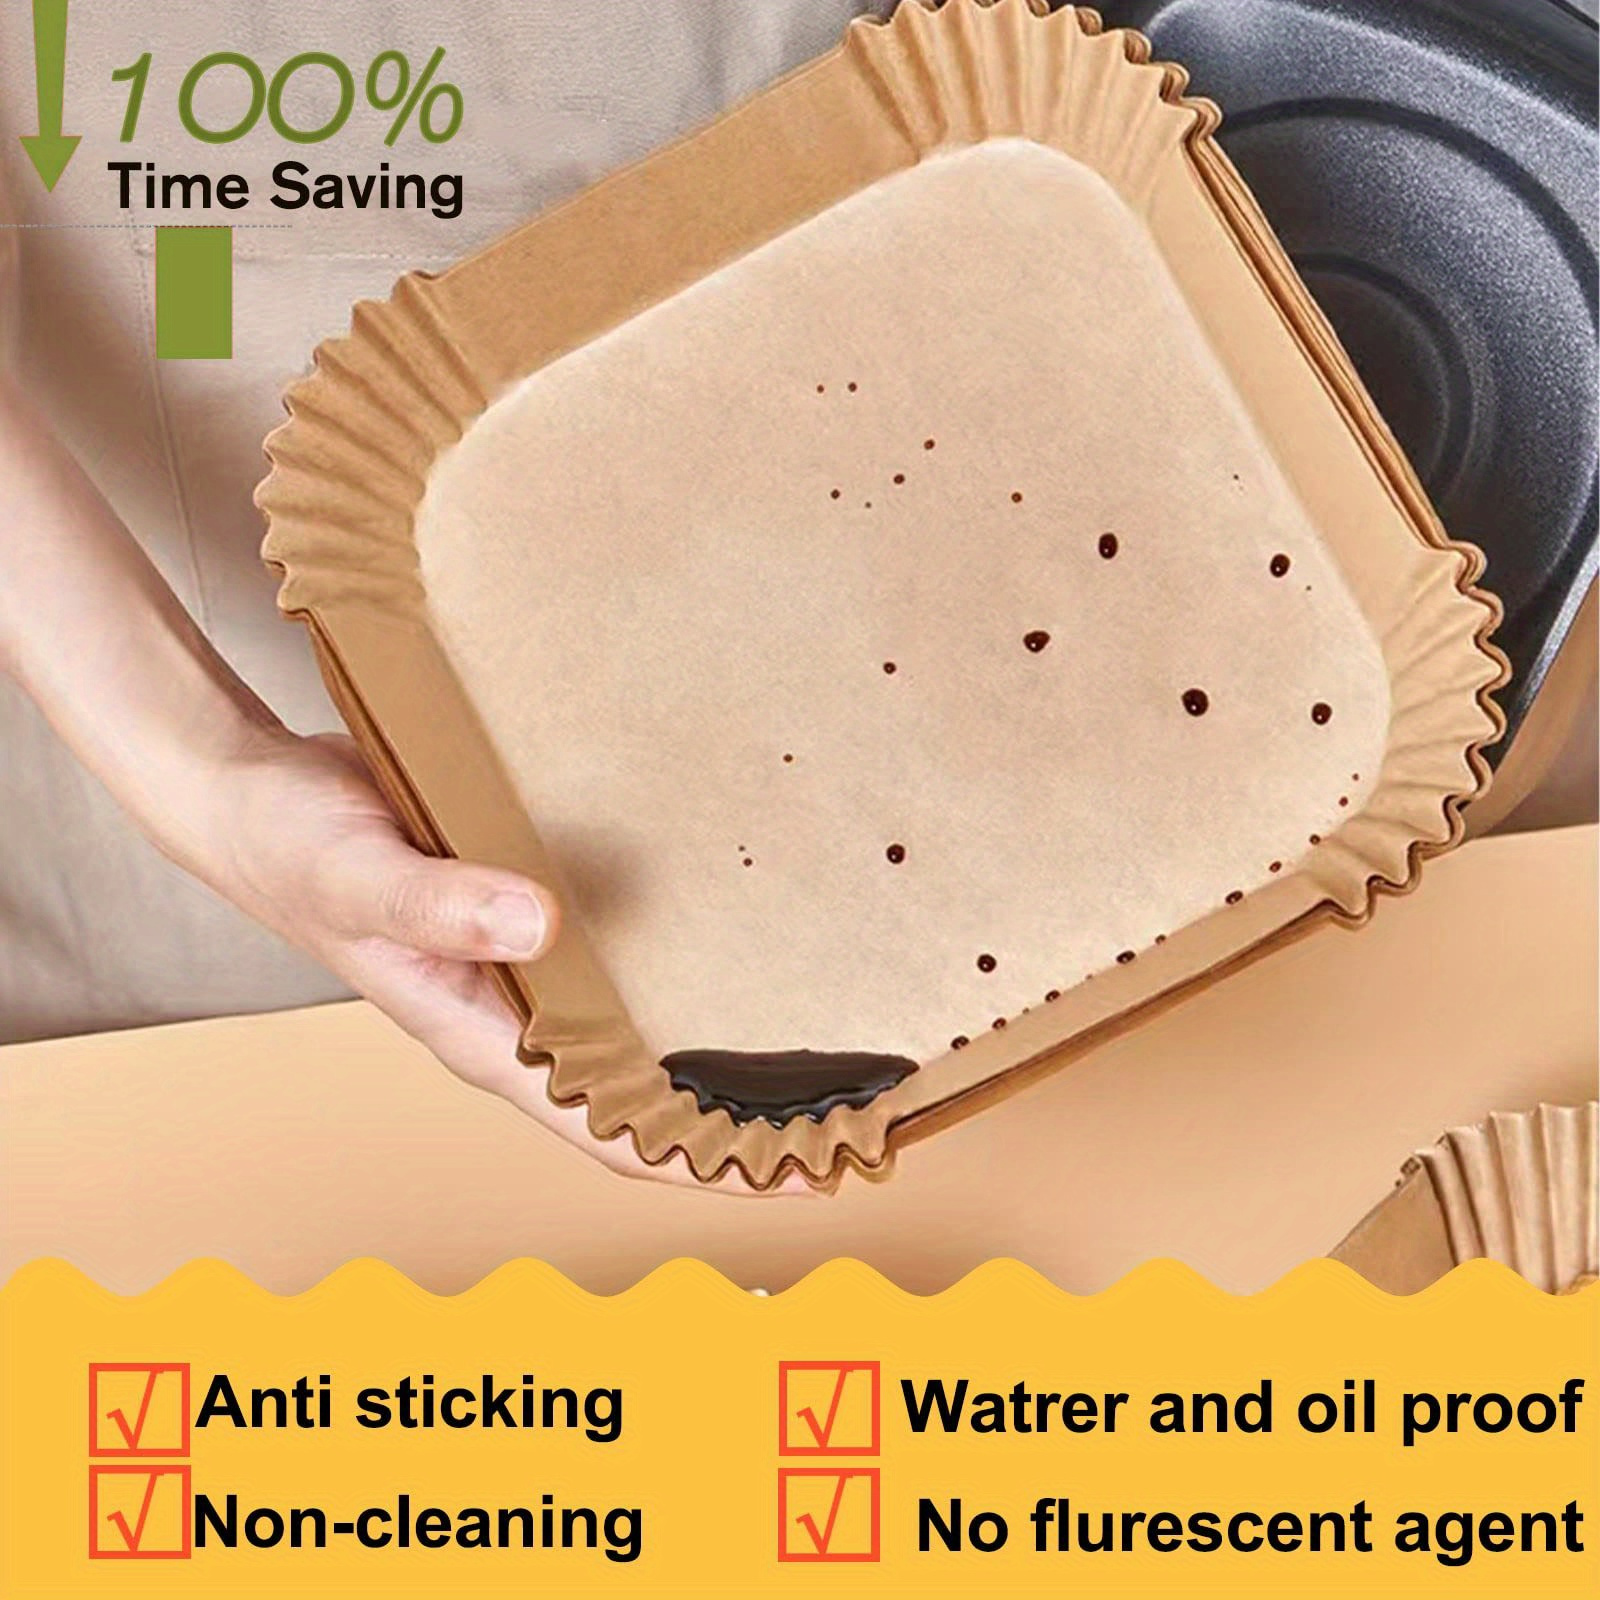 Kitchen Disposable Air Fryer Round Square Rectangular Paper Liners